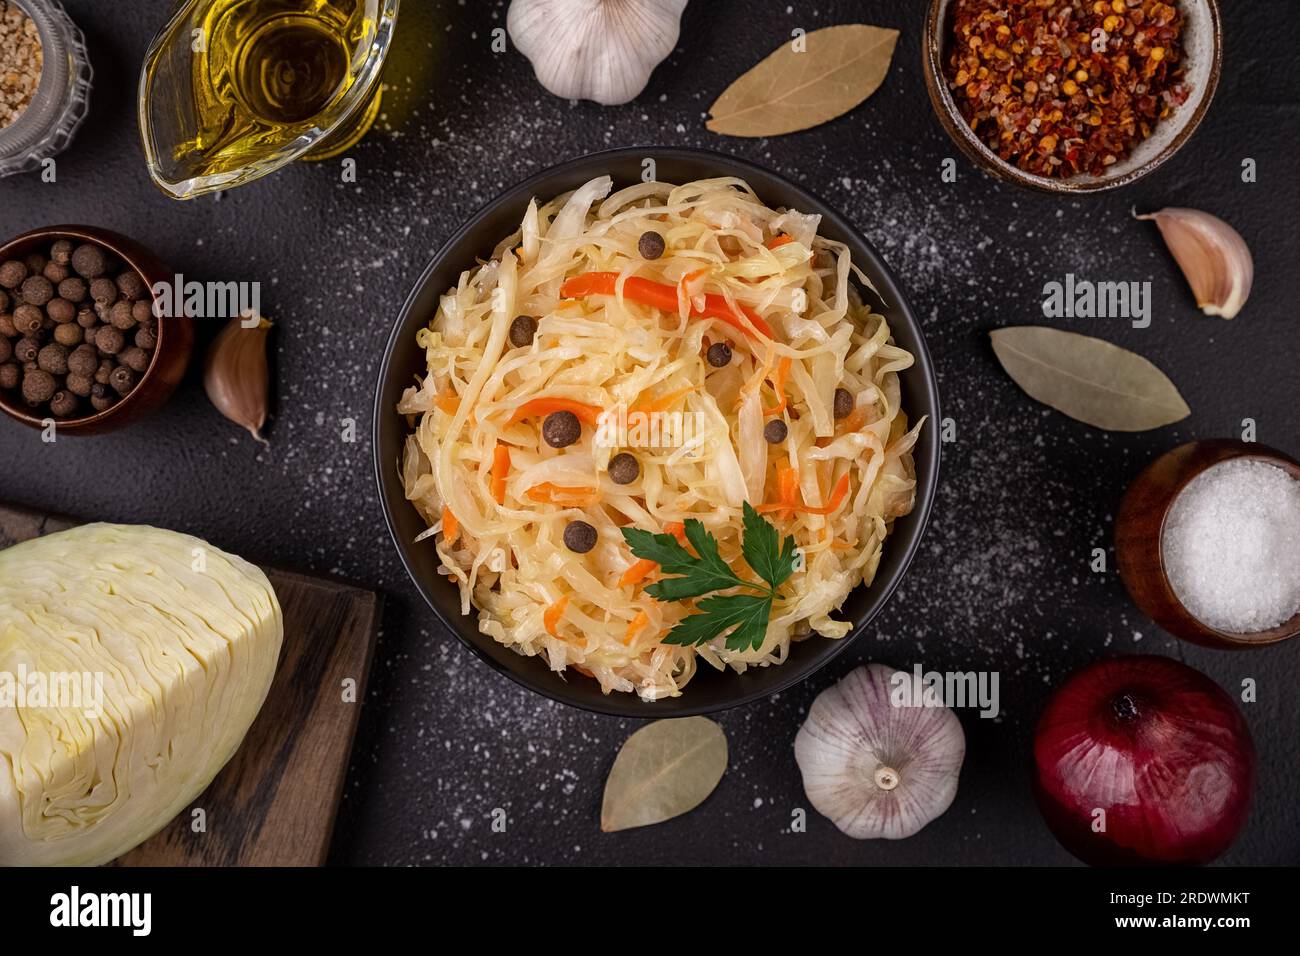 Black bowl with sour sauerkraut decorated parsley and pepper on dark background flat lay with ingredients fresh cabbage, oil, garlic Stock Photo